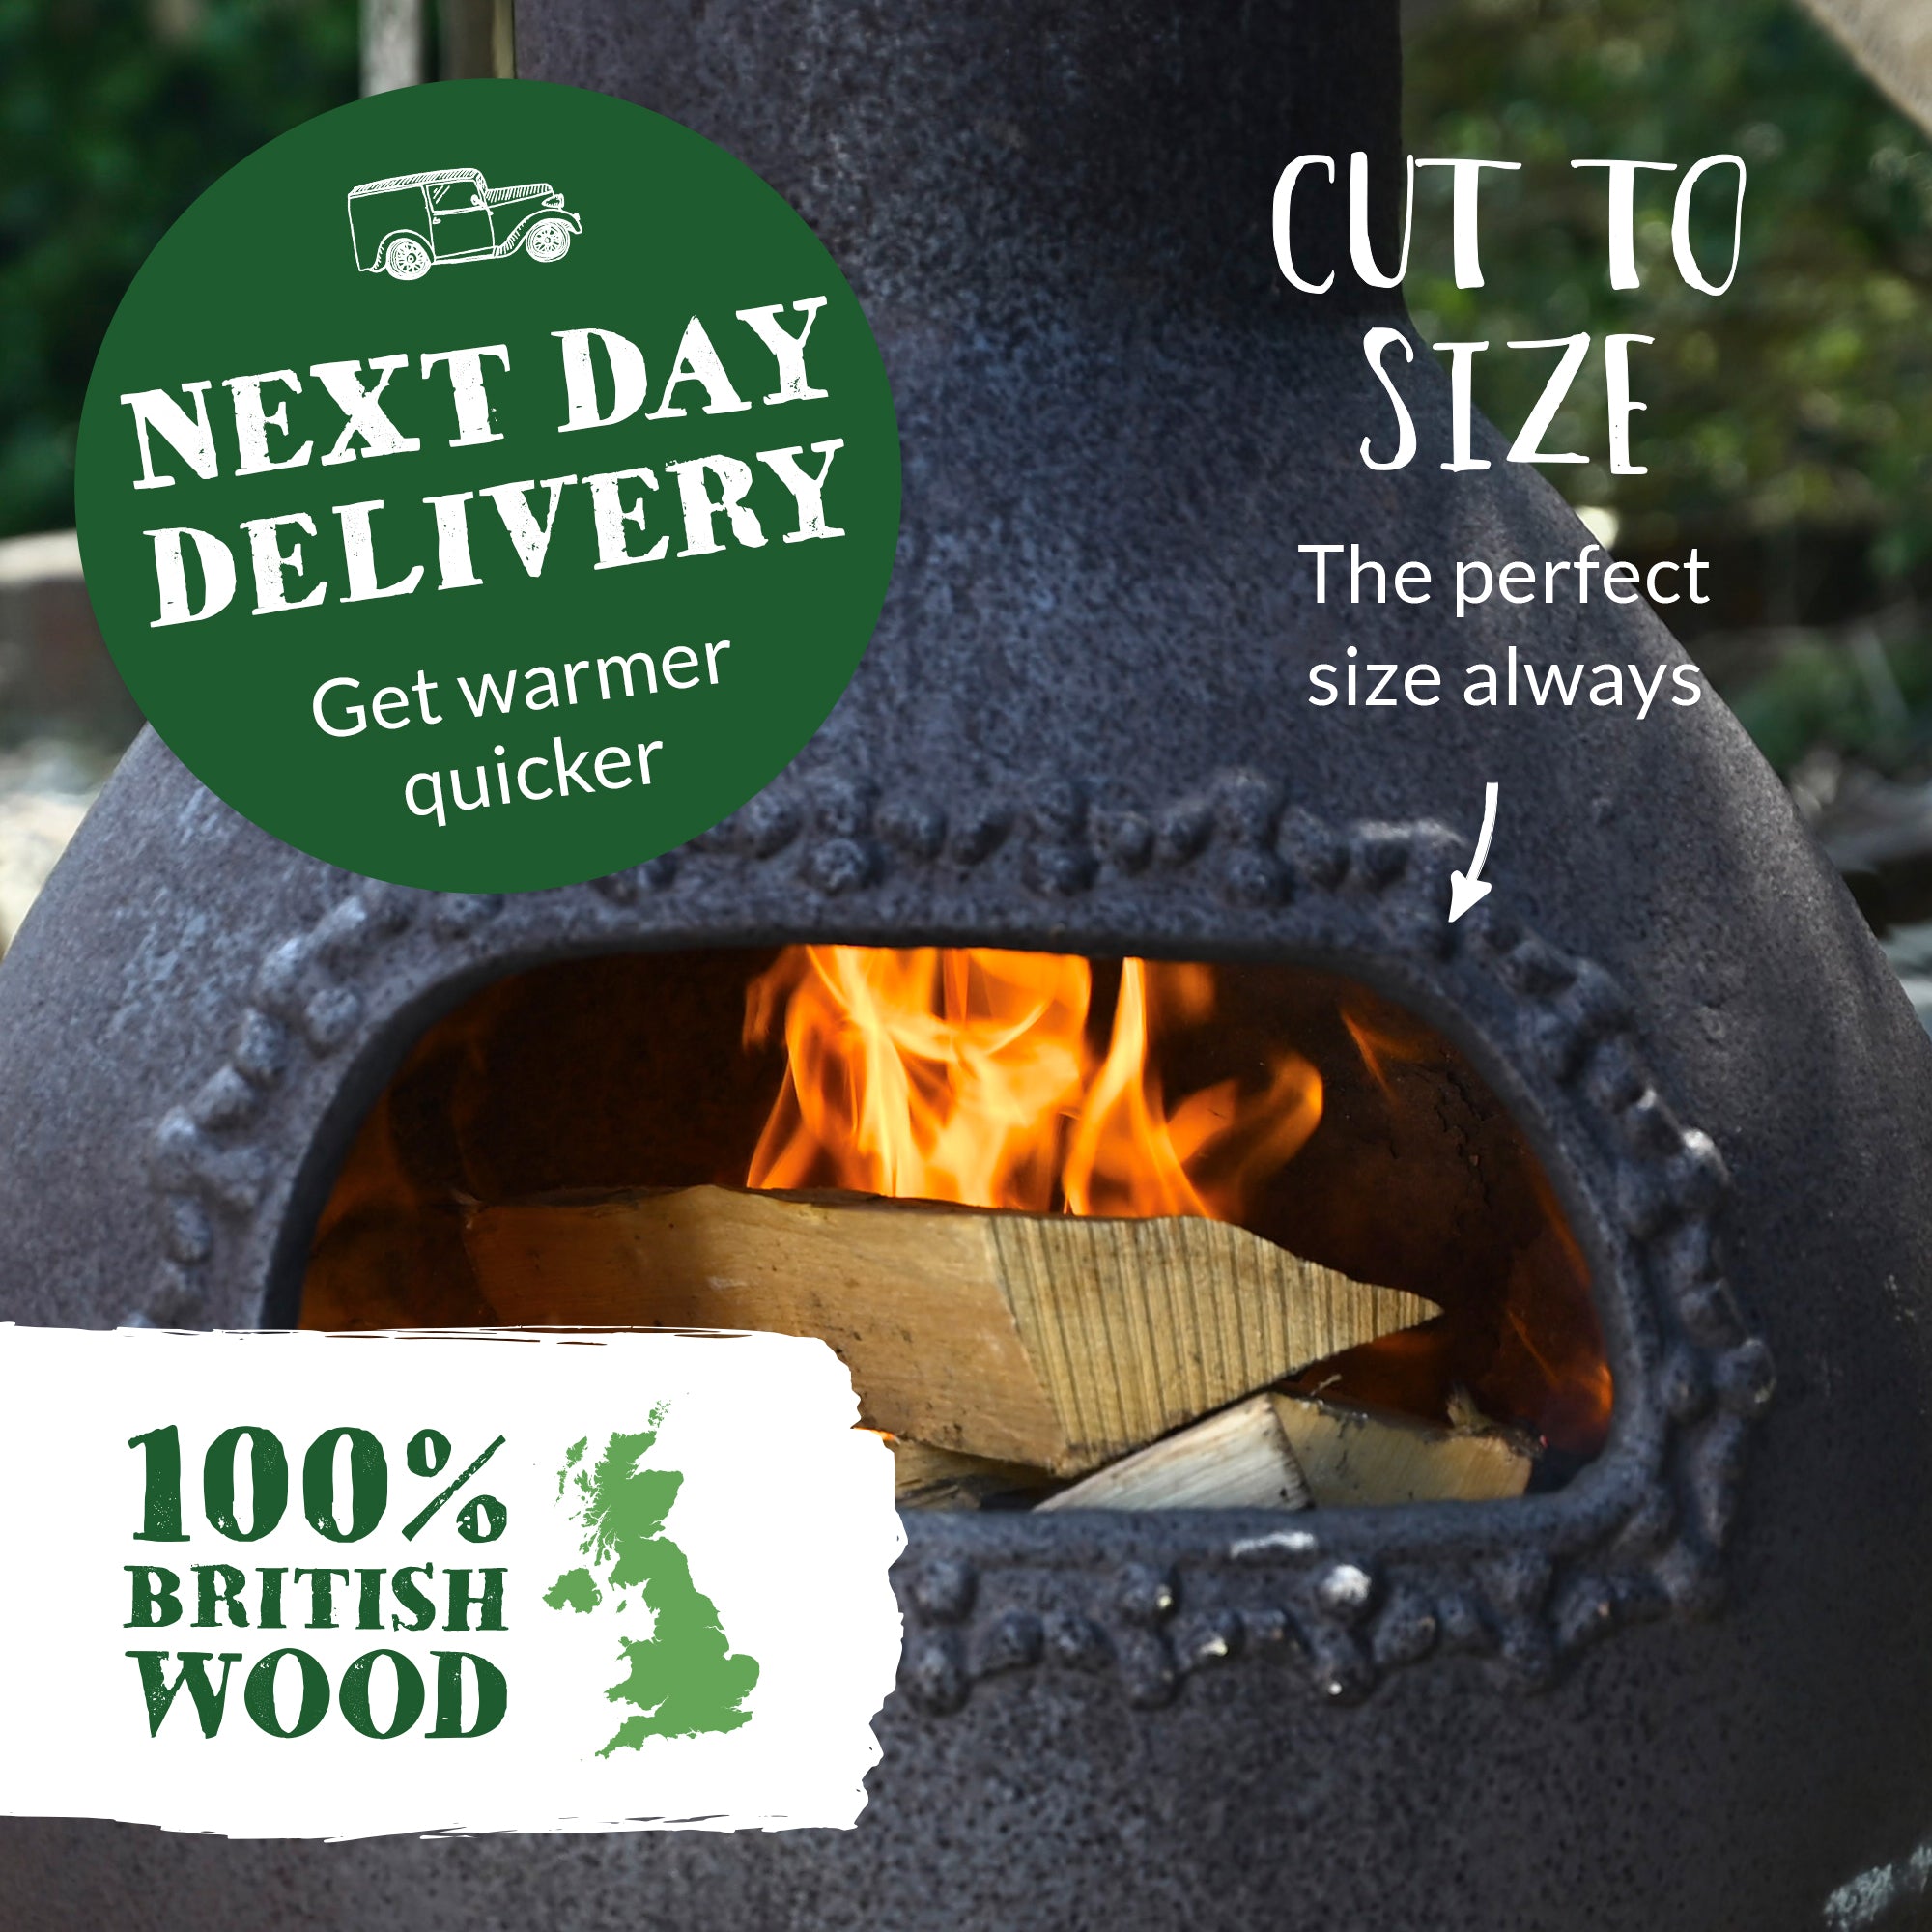 Chiminea Starter Kit. Kiln Dried Hardwood Logs, Kindling, Natural Firelighters and Matches